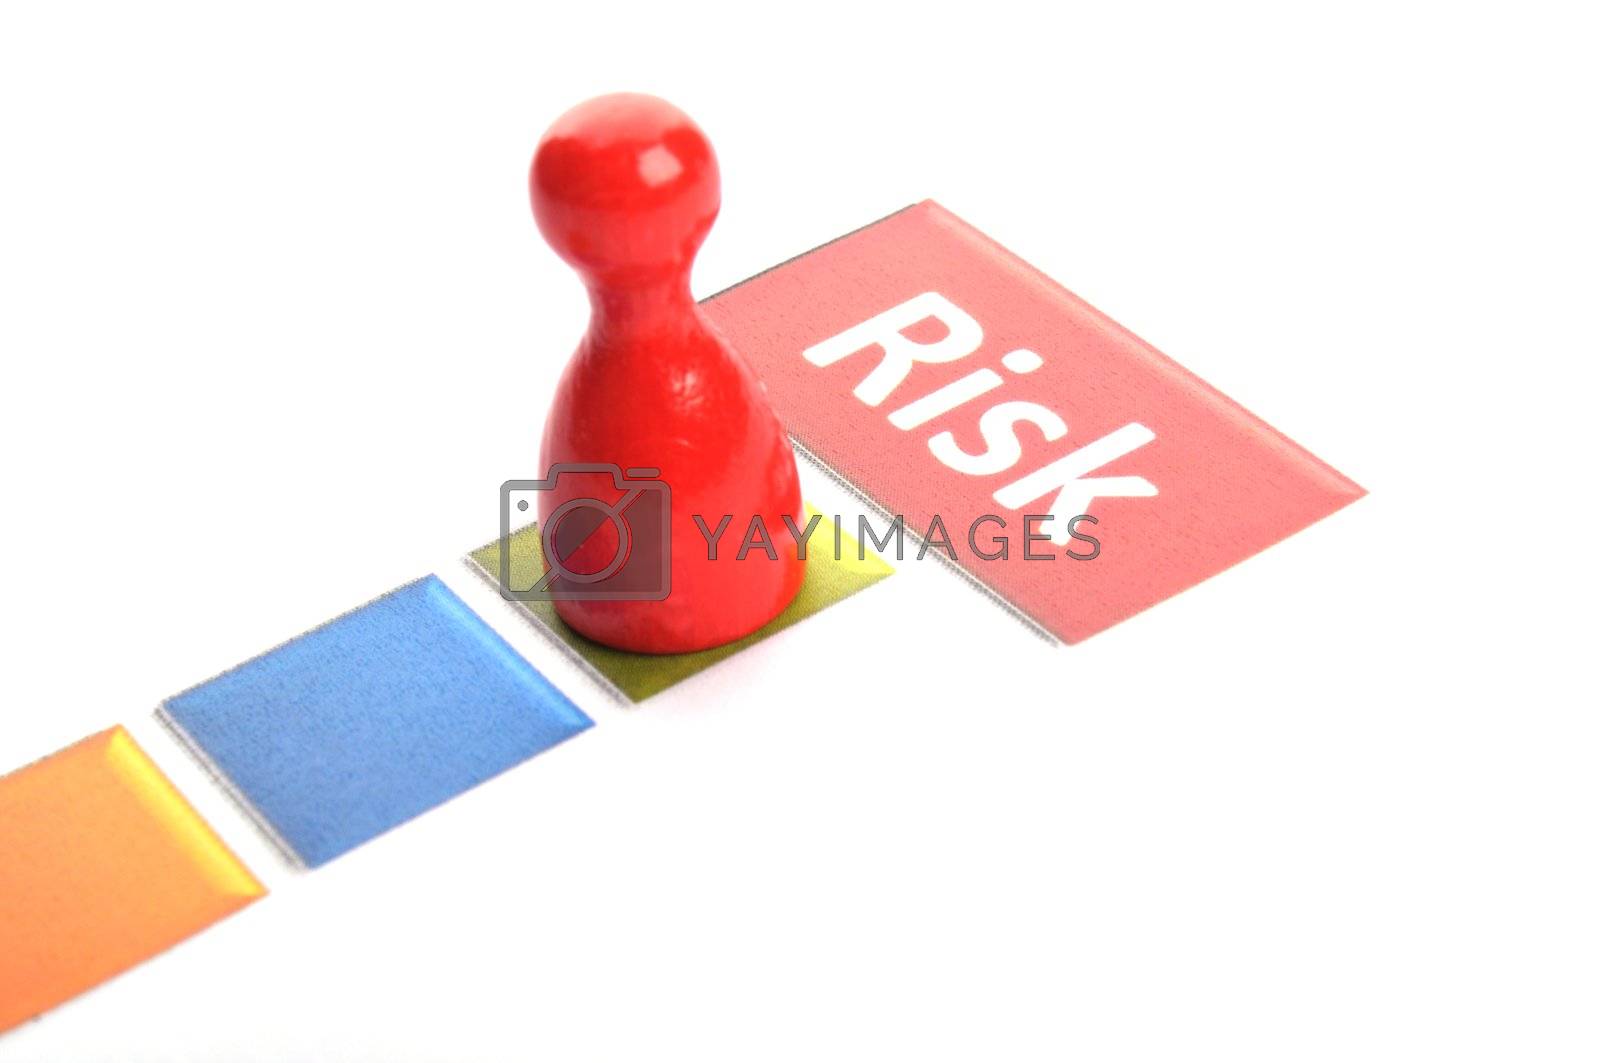 Royalty free image of risk by gunnar3000